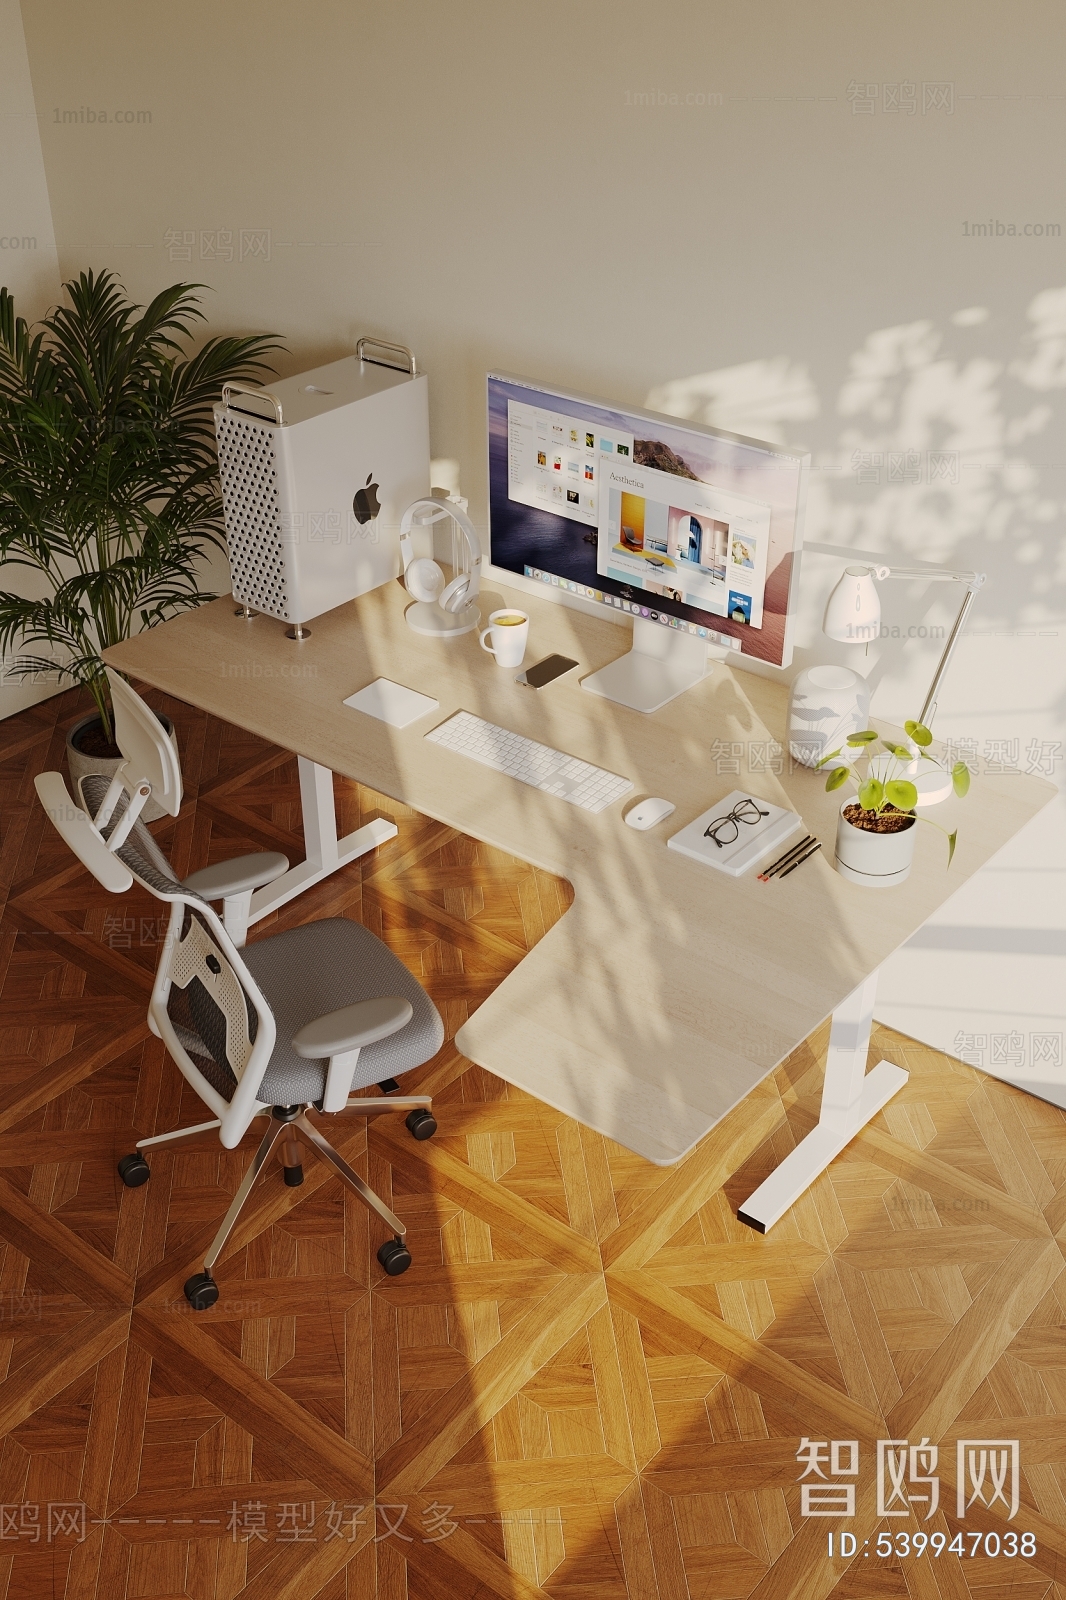 Modern Computer Desk And Chair